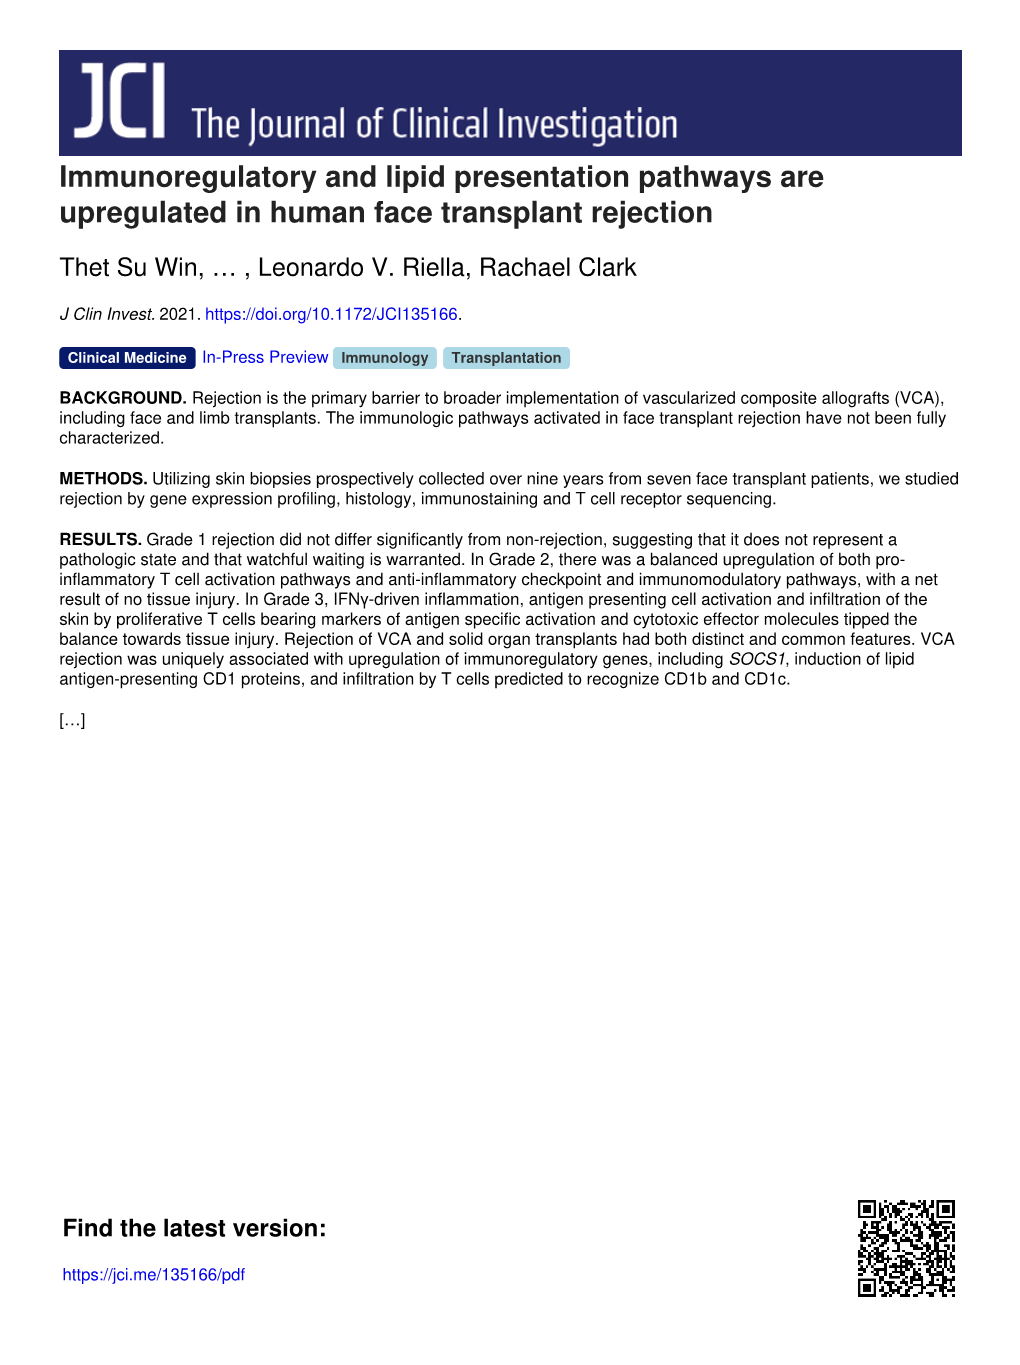 Immunoregulatory and Lipid Presentation Pathways Are Upregulated in Human Face Transplant Rejection